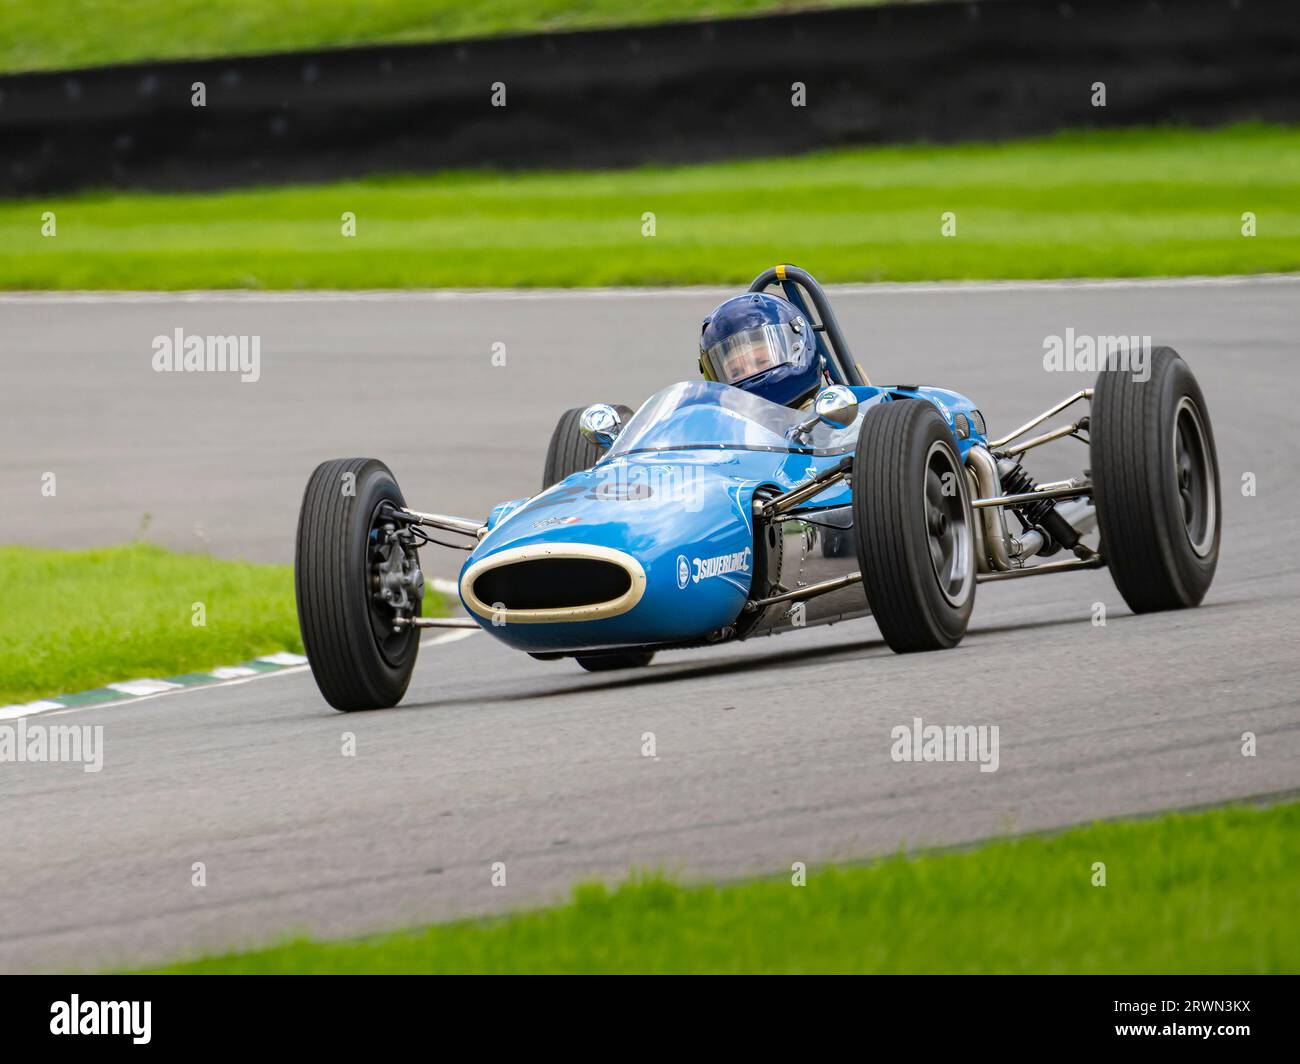 Lotus Climax 25 F1 car on track during testing at the Goodwood Revival, West Sussex UK Stock Photo